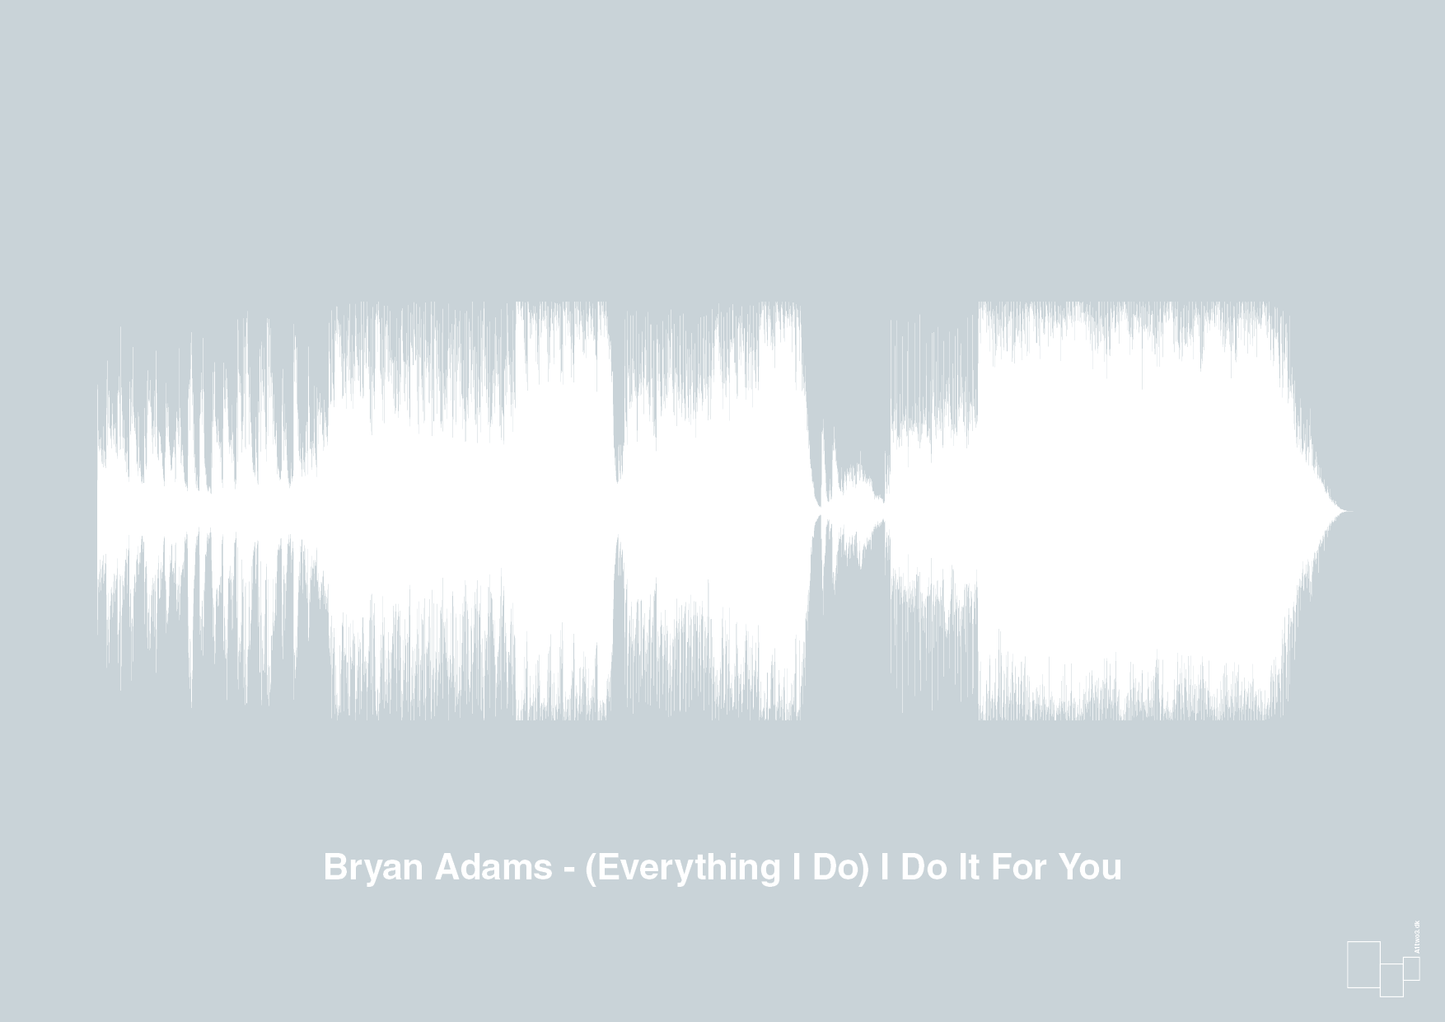 bryan adams - (everything i do) i do it for you - Plakat med Musik i Light Drizzle